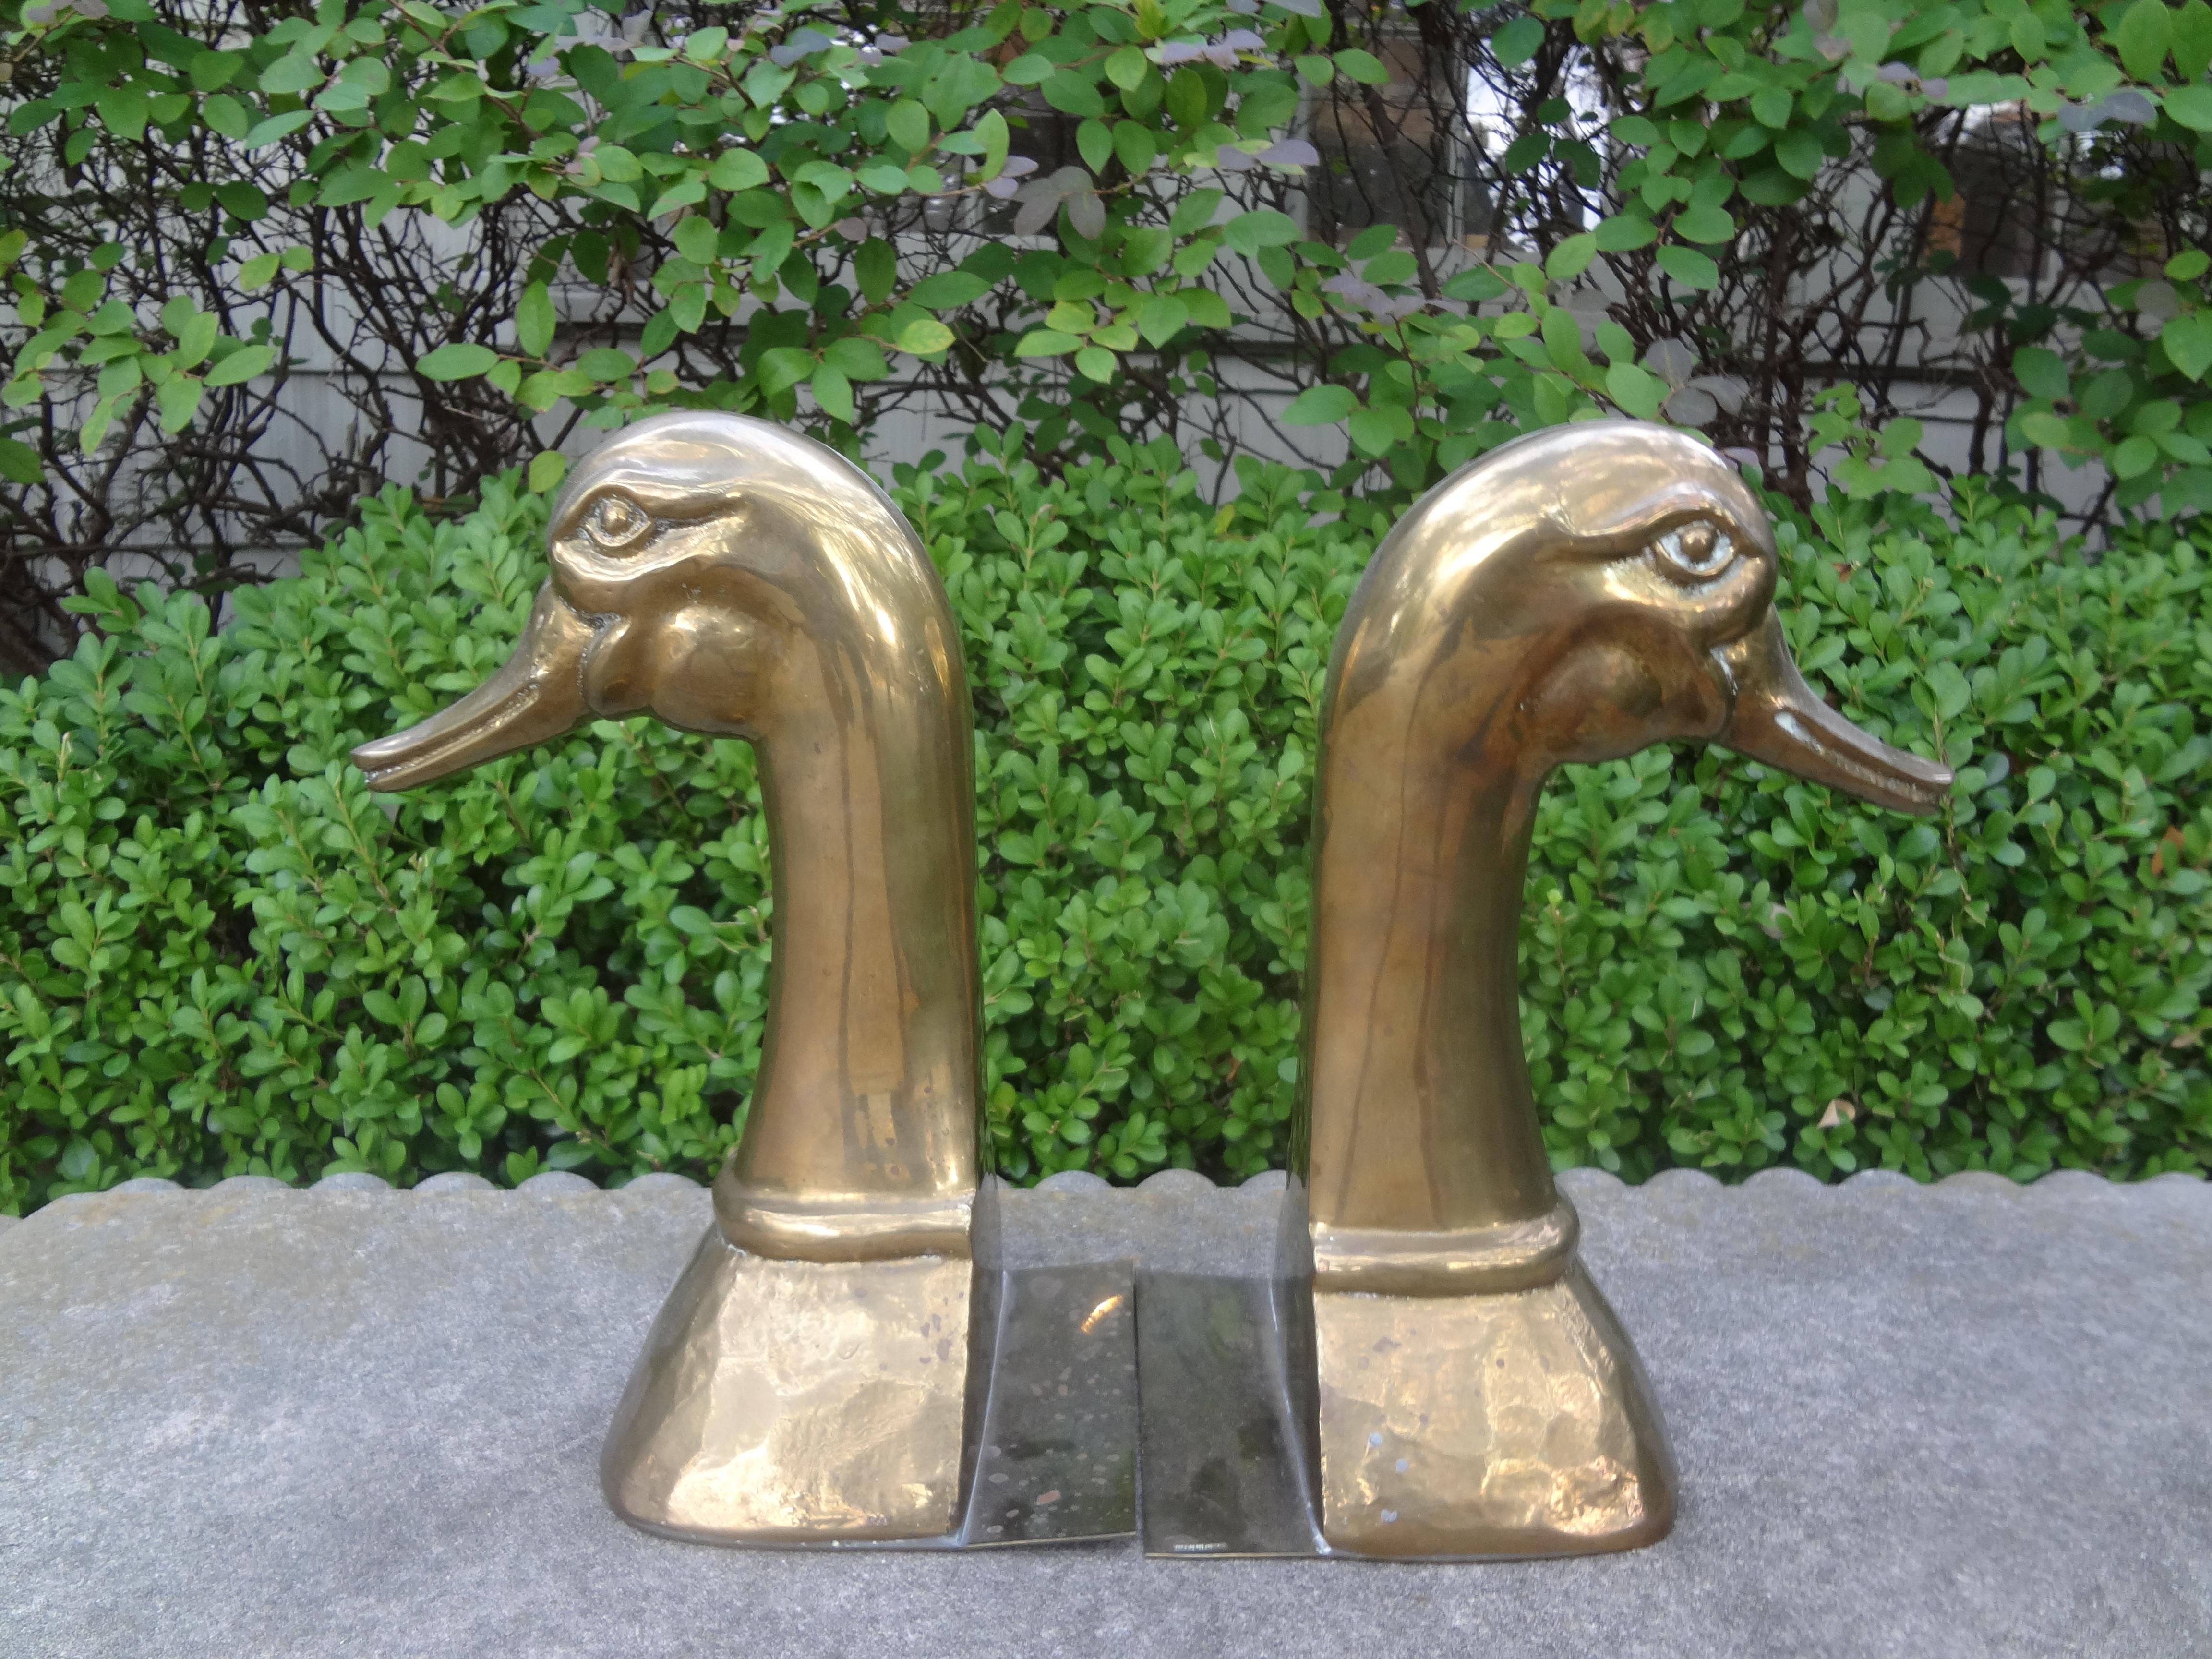 Large pair of Hollywood Regency polished brass bookends by Sarreid Ltd. This handsome pair of brass bookends is the largest size we have seen. Dimensions: 10